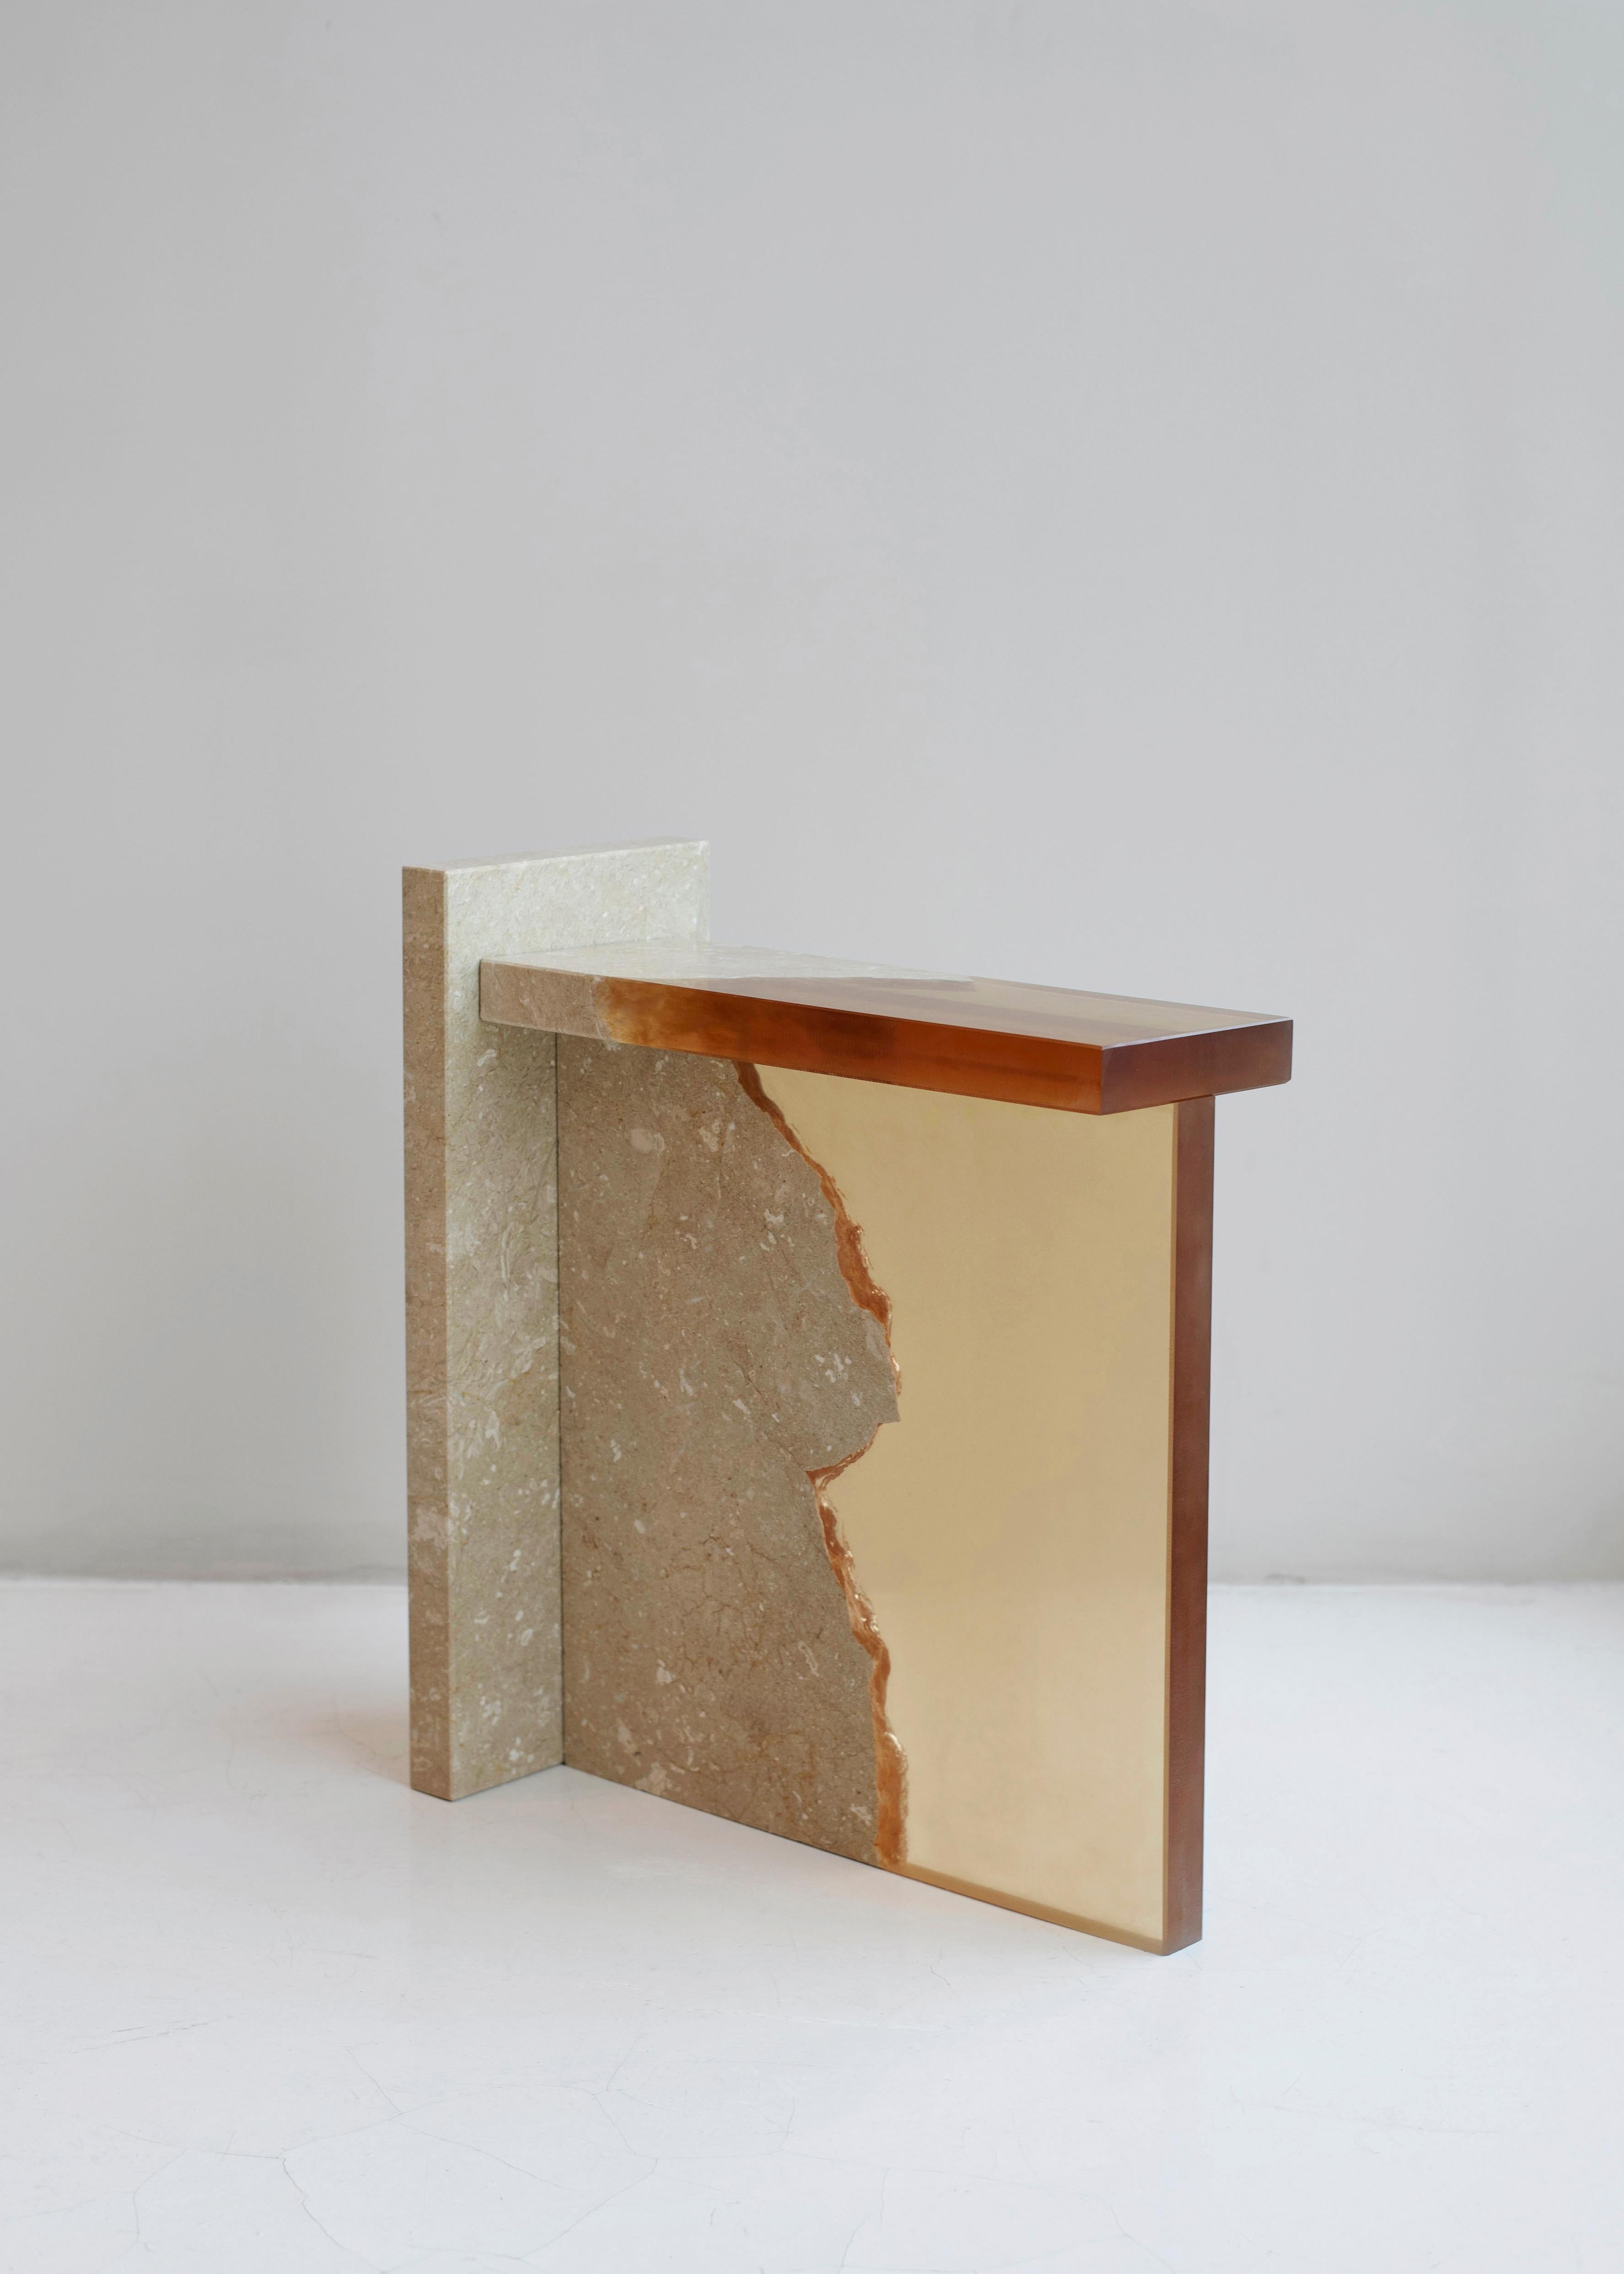 Crystal marble fragment side table by Jang Hea Kyoung
Artist: Jang Hea Kyoung
Materials: Crystal Resin and Marble
Dimensions: 52 x 24 x 60 cm

Jang Hea Kyoung is based in Seoul, Republic of Korea. She searches for Craft elements and makes